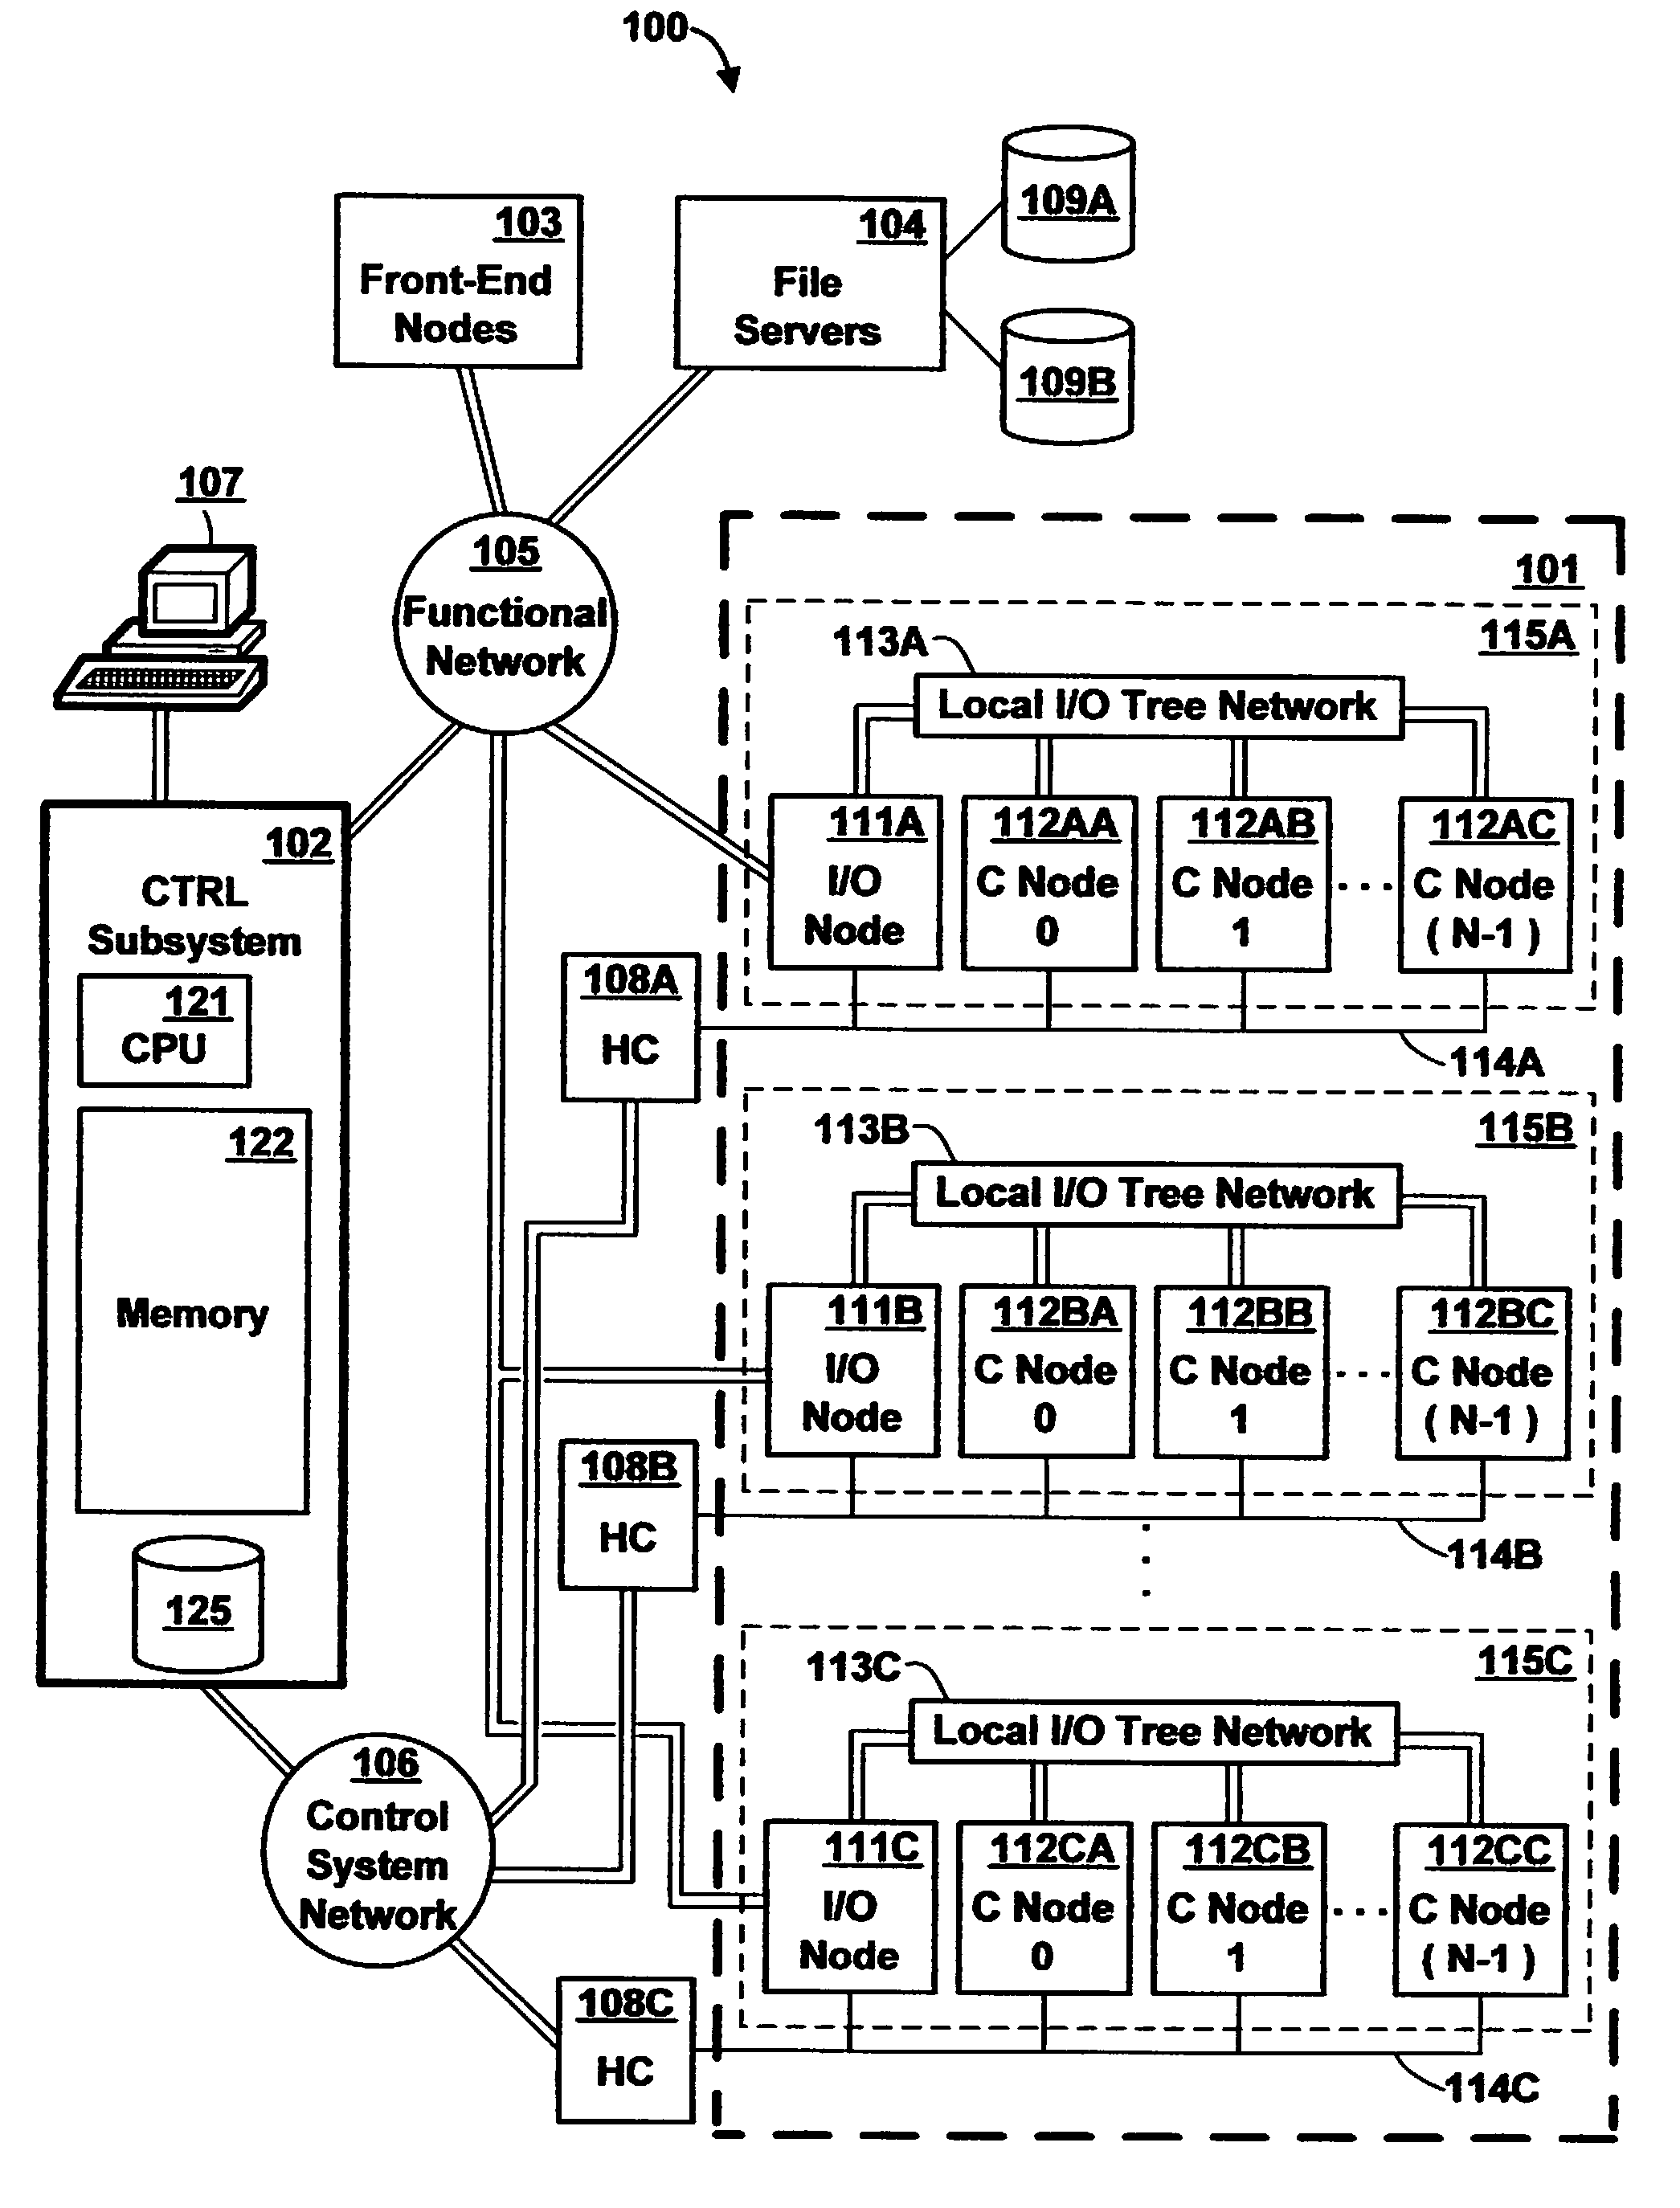 Method and Apparatus for Routing Data in an Inter-Nodal Communications Lattice of a Massively Parallel Computer System by Dynamically Adjusting Local Routing Strategies